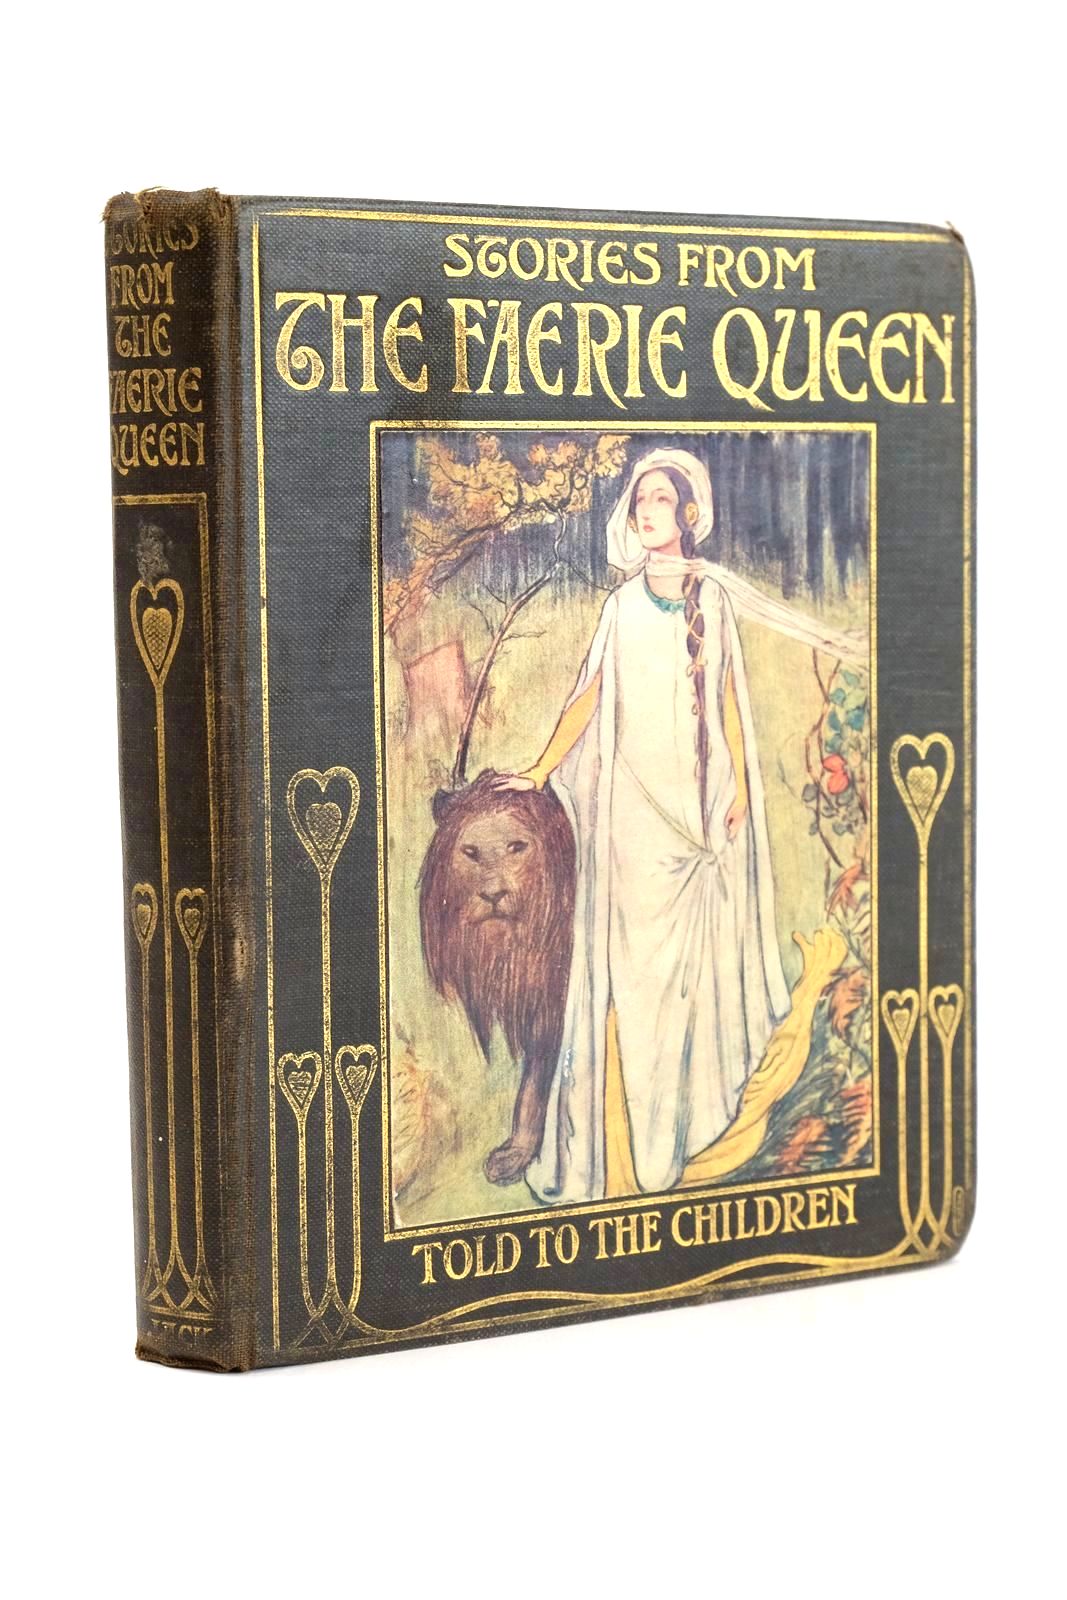 Photo of STORIES FROM THE FAERIE QUEEN written by Lang, Jeanie illustrated by Le Quesne, Rose published by T.C. &amp; E.C. Jack (STOCK CODE: 1324617)  for sale by Stella & Rose's Books